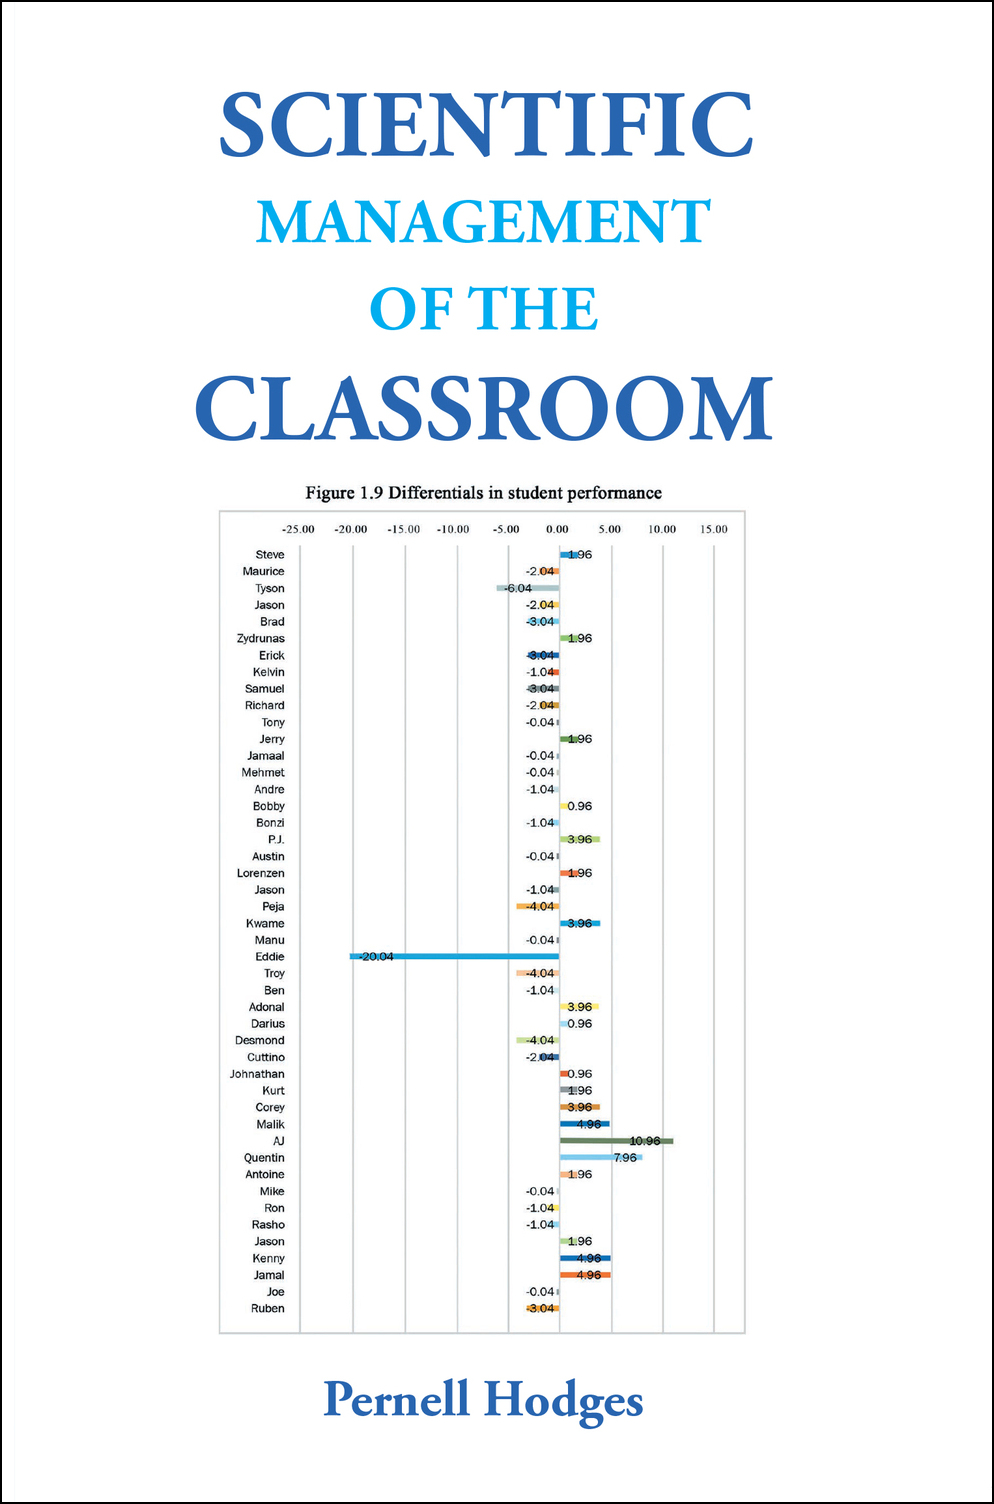 Author Pernell Hodges’s New Book, "Scientific Management of the Classroom," is Designed to Help Teachers Use Scientific Research to Improve the Outcomes of Their Students